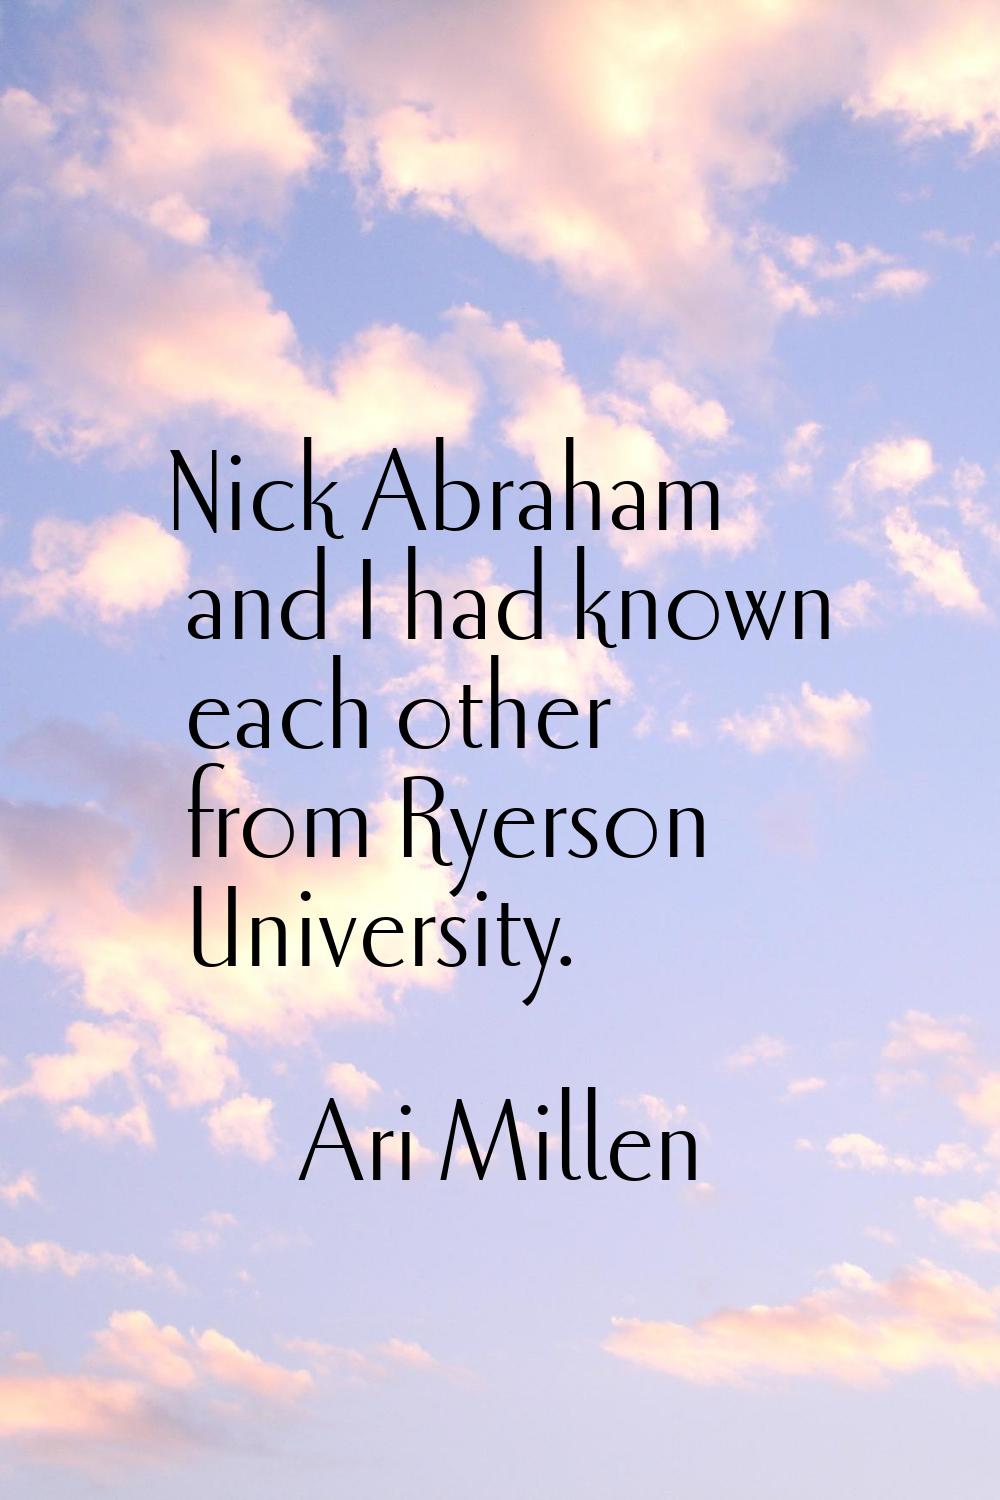 Nick Abraham and I had known each other from Ryerson University.